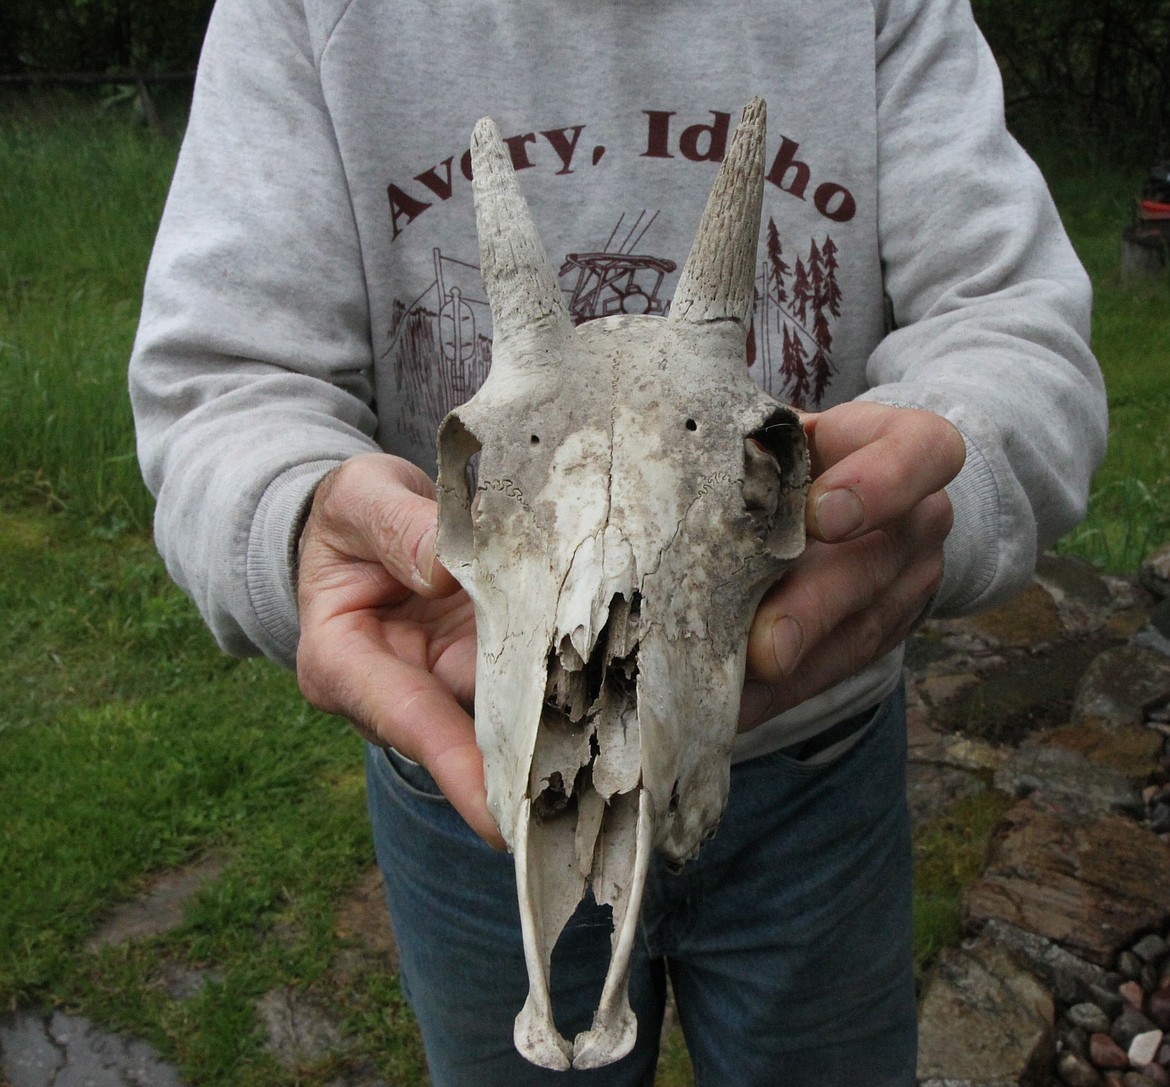 Former Avery postmaster and Forest Service hydrologist Wade Bilbrey holds a mountain goat skull he found in the St. Joe River area.

Ralph Bartholdt